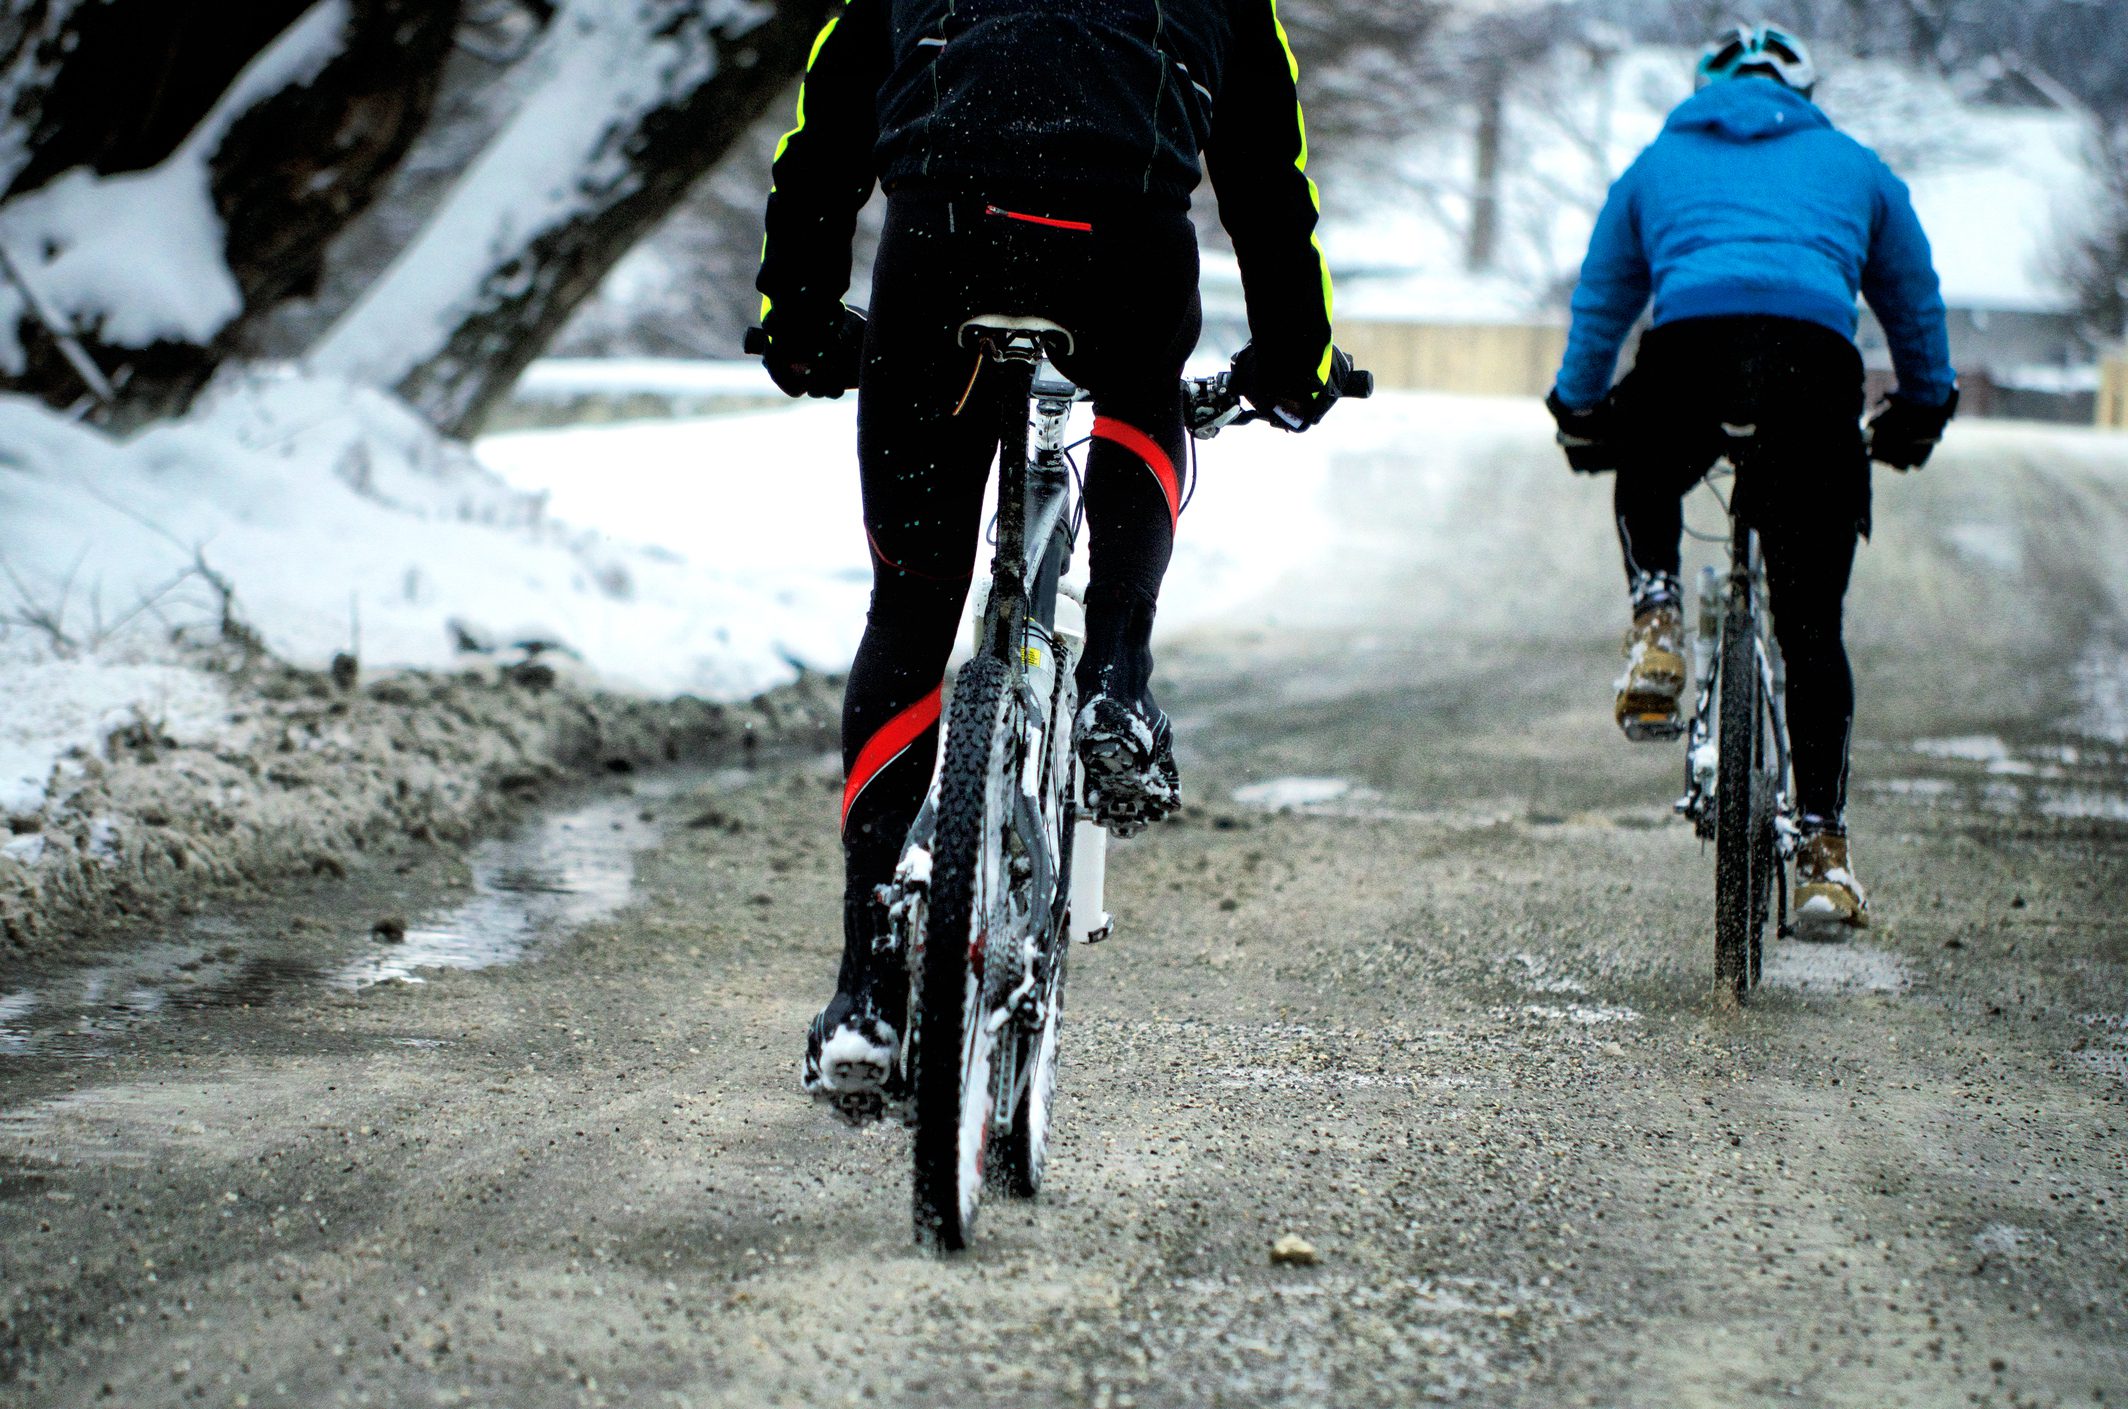 Pam Blalock's 5 Best Tips to Winter Cycling